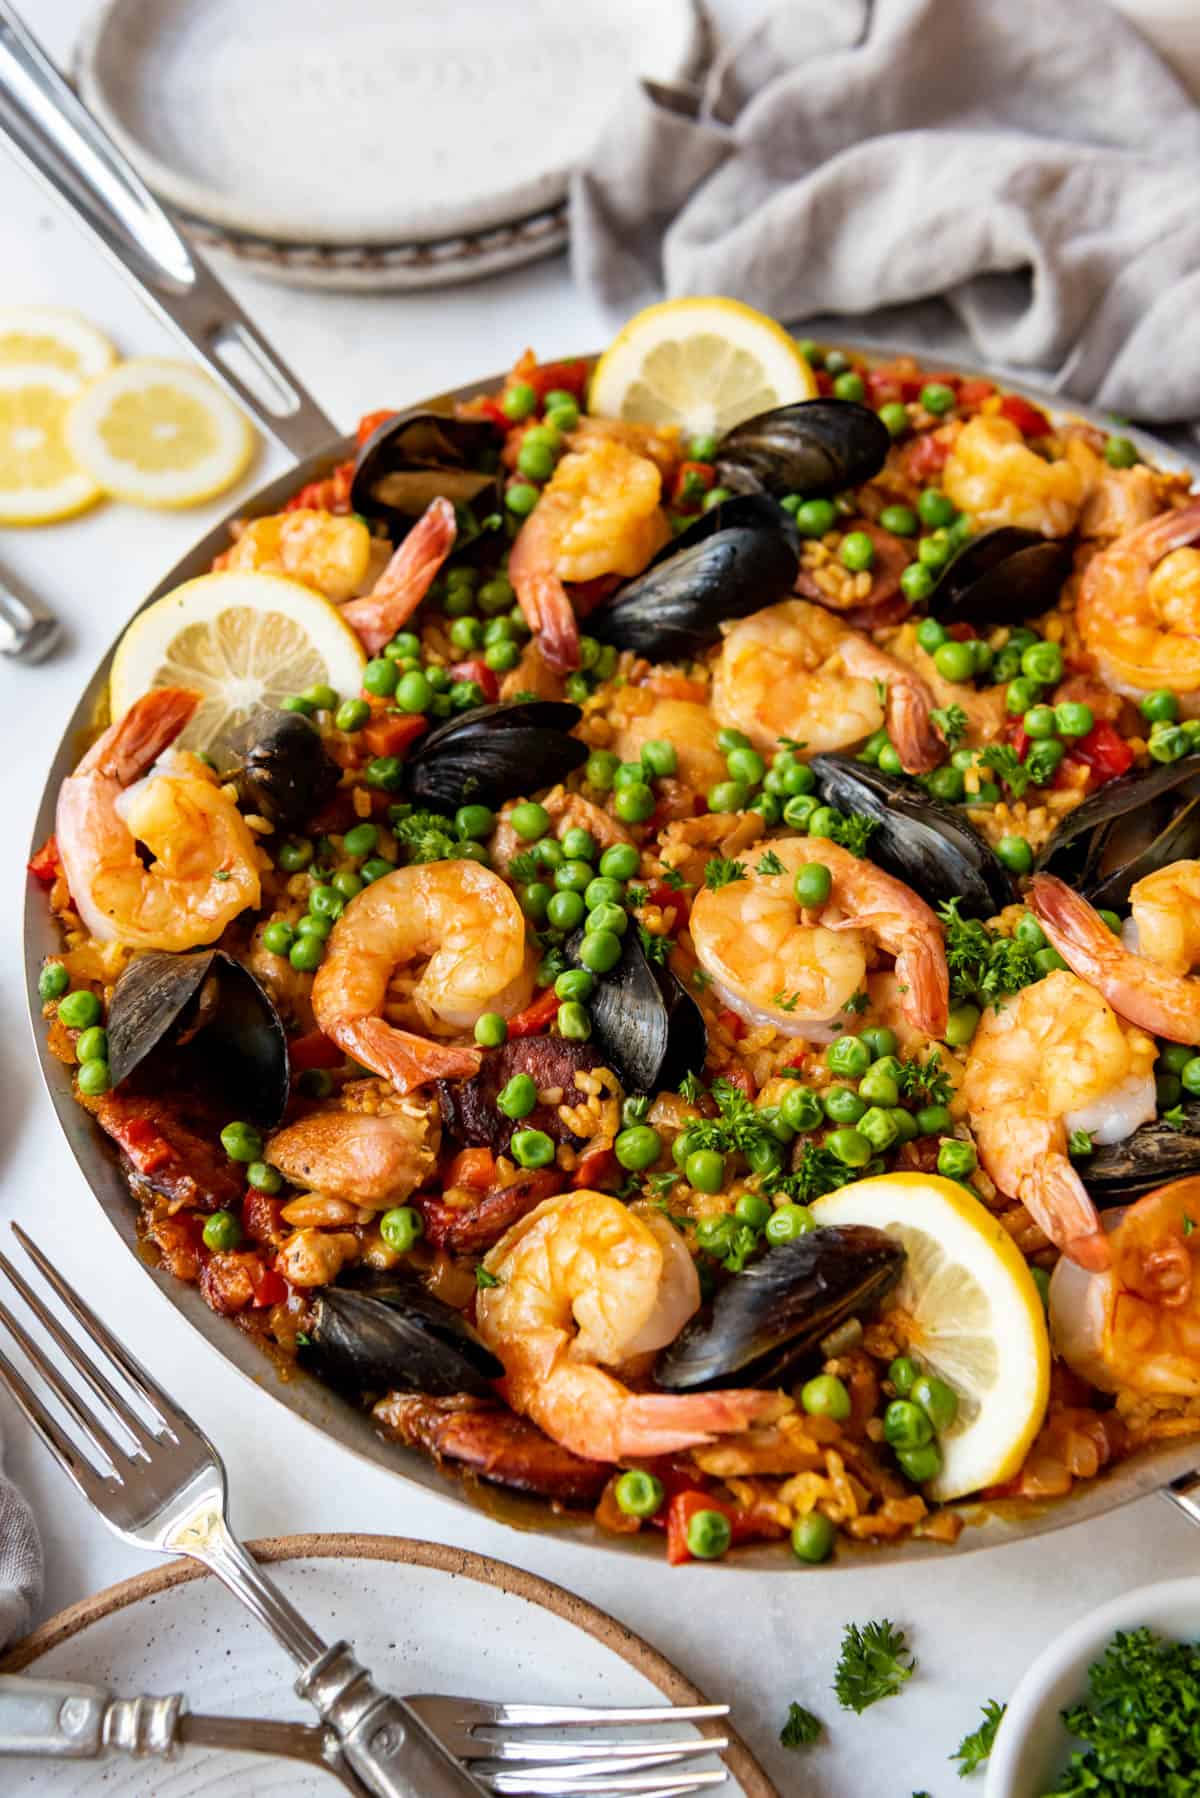 A large pan of Spanish paella with shrimp and mussels.